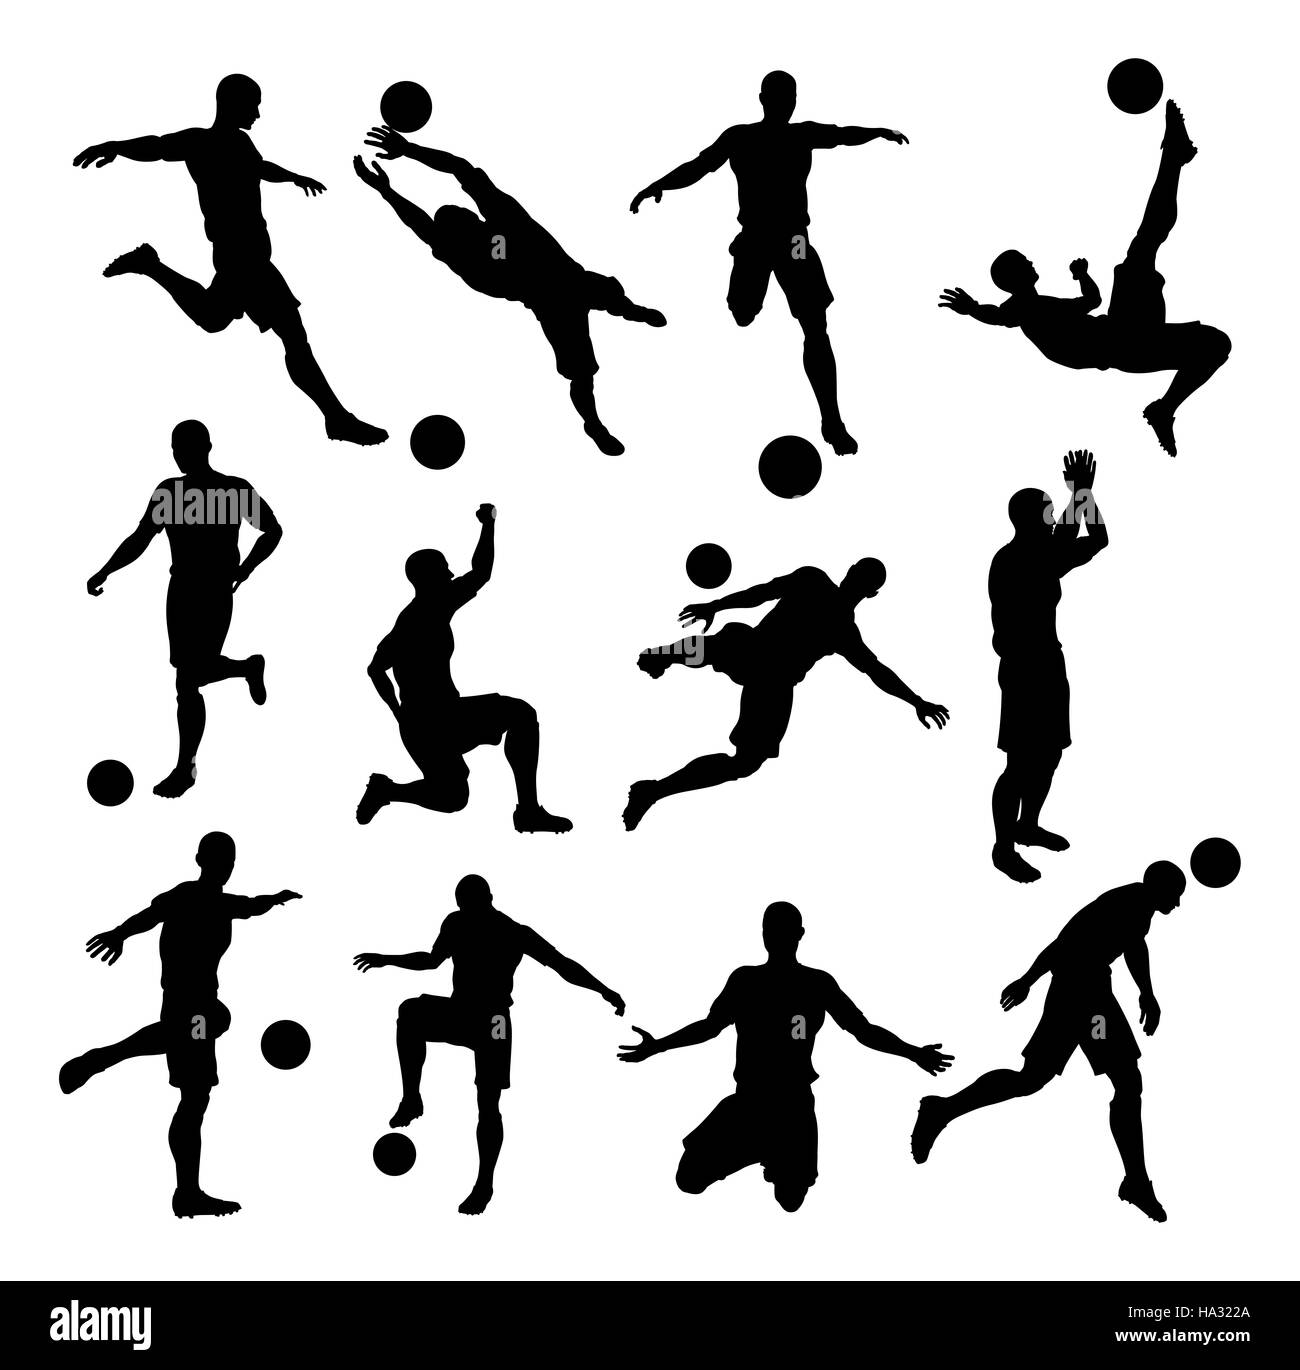 A set of Soccer Footballer Silhouettes in lots of different poses Stock Photo